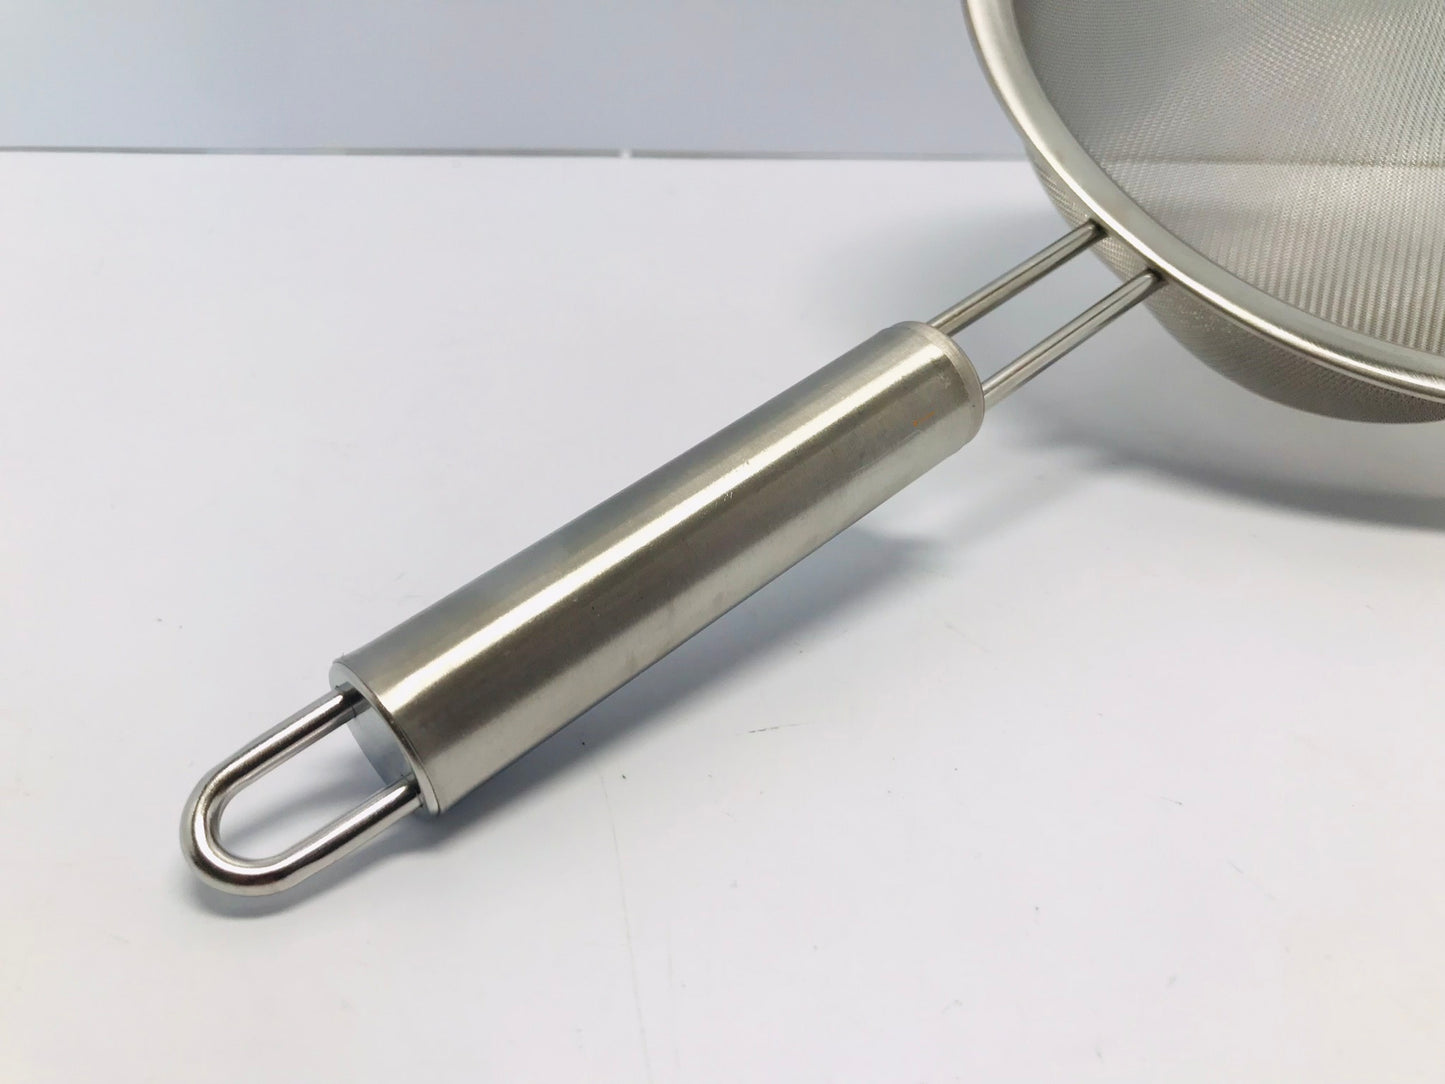 Stainless Strainer Large 8 Inch Excellent